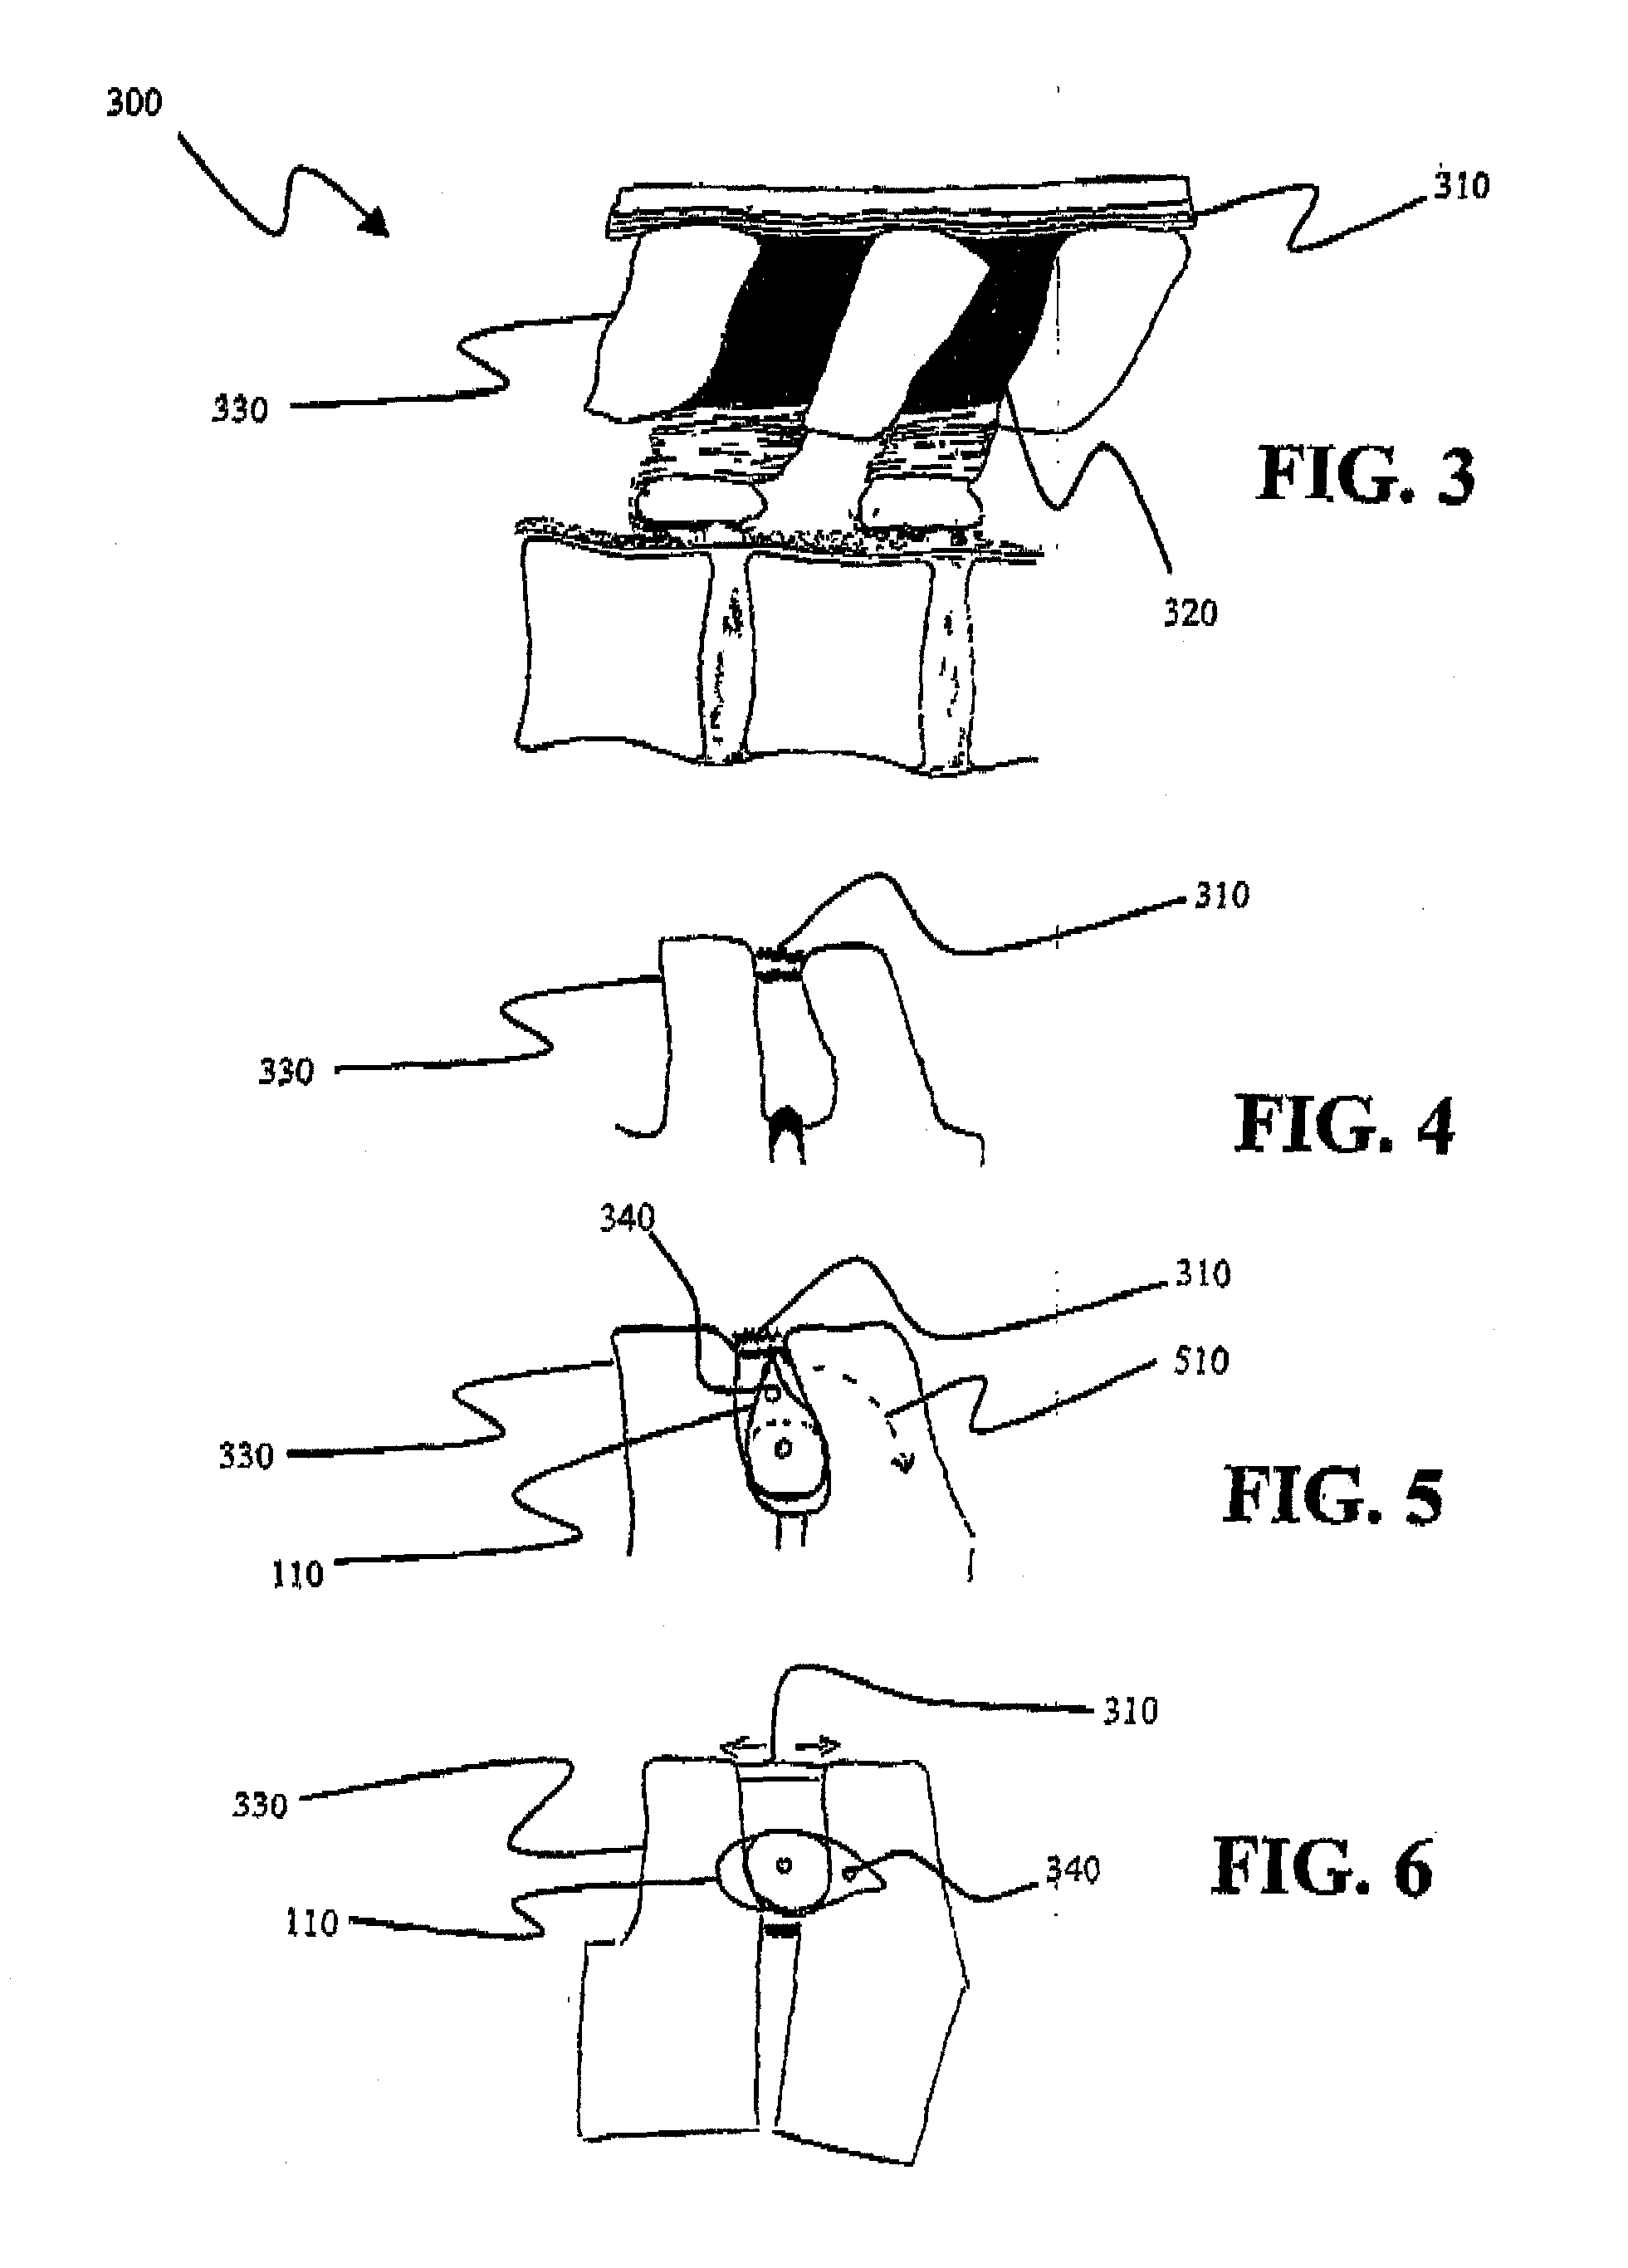 Interspinous Internal Fixation/Distraction Device